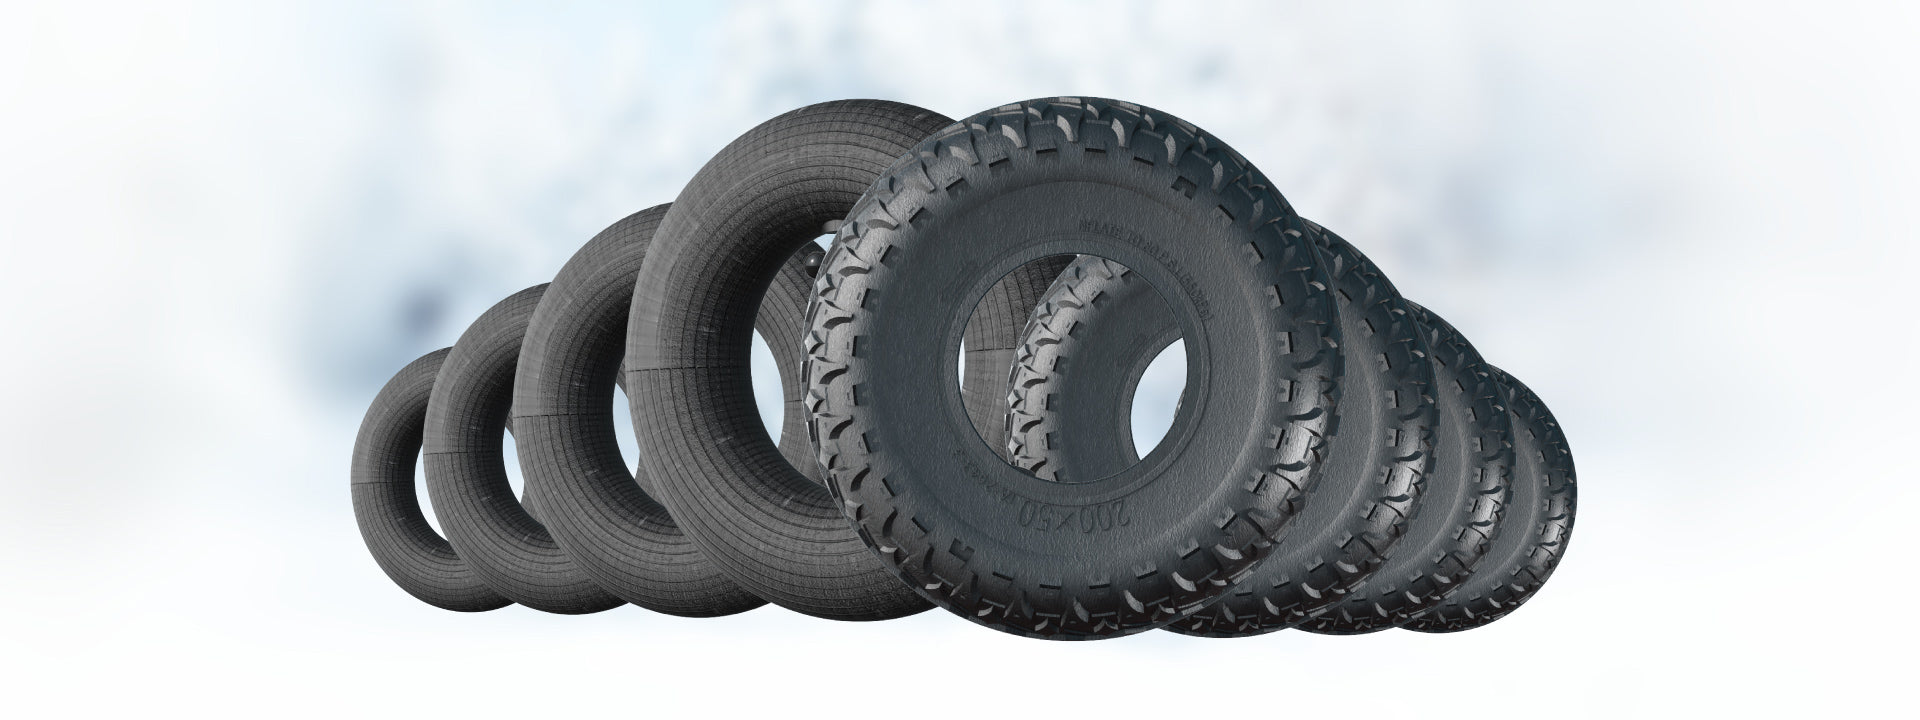 Tires, Inner tubes and Rims